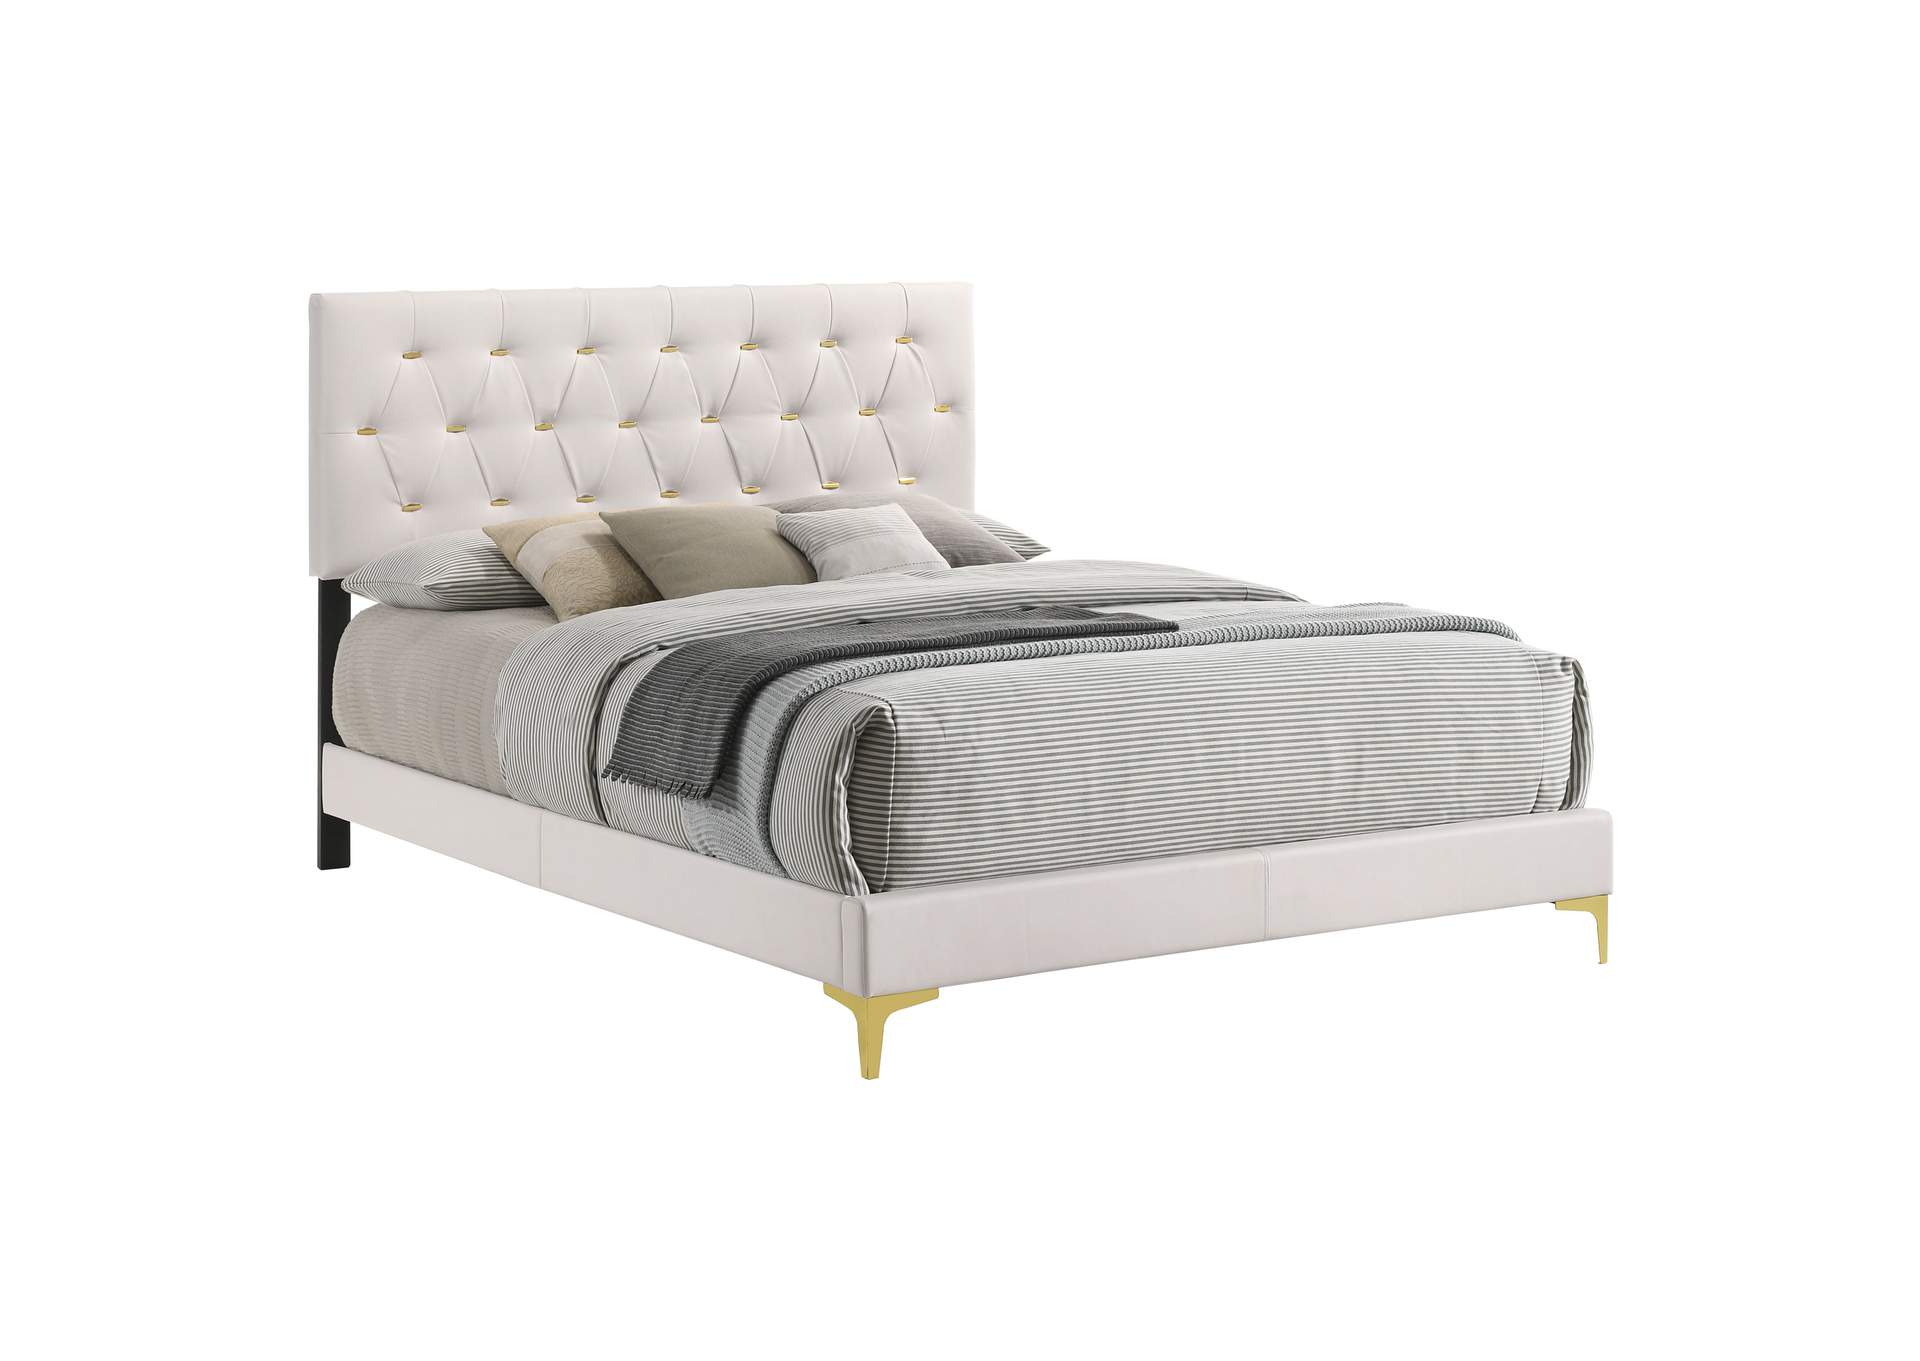 Kendall Tufted Upholstered Panel Queen Bed White,Coaster Furniture